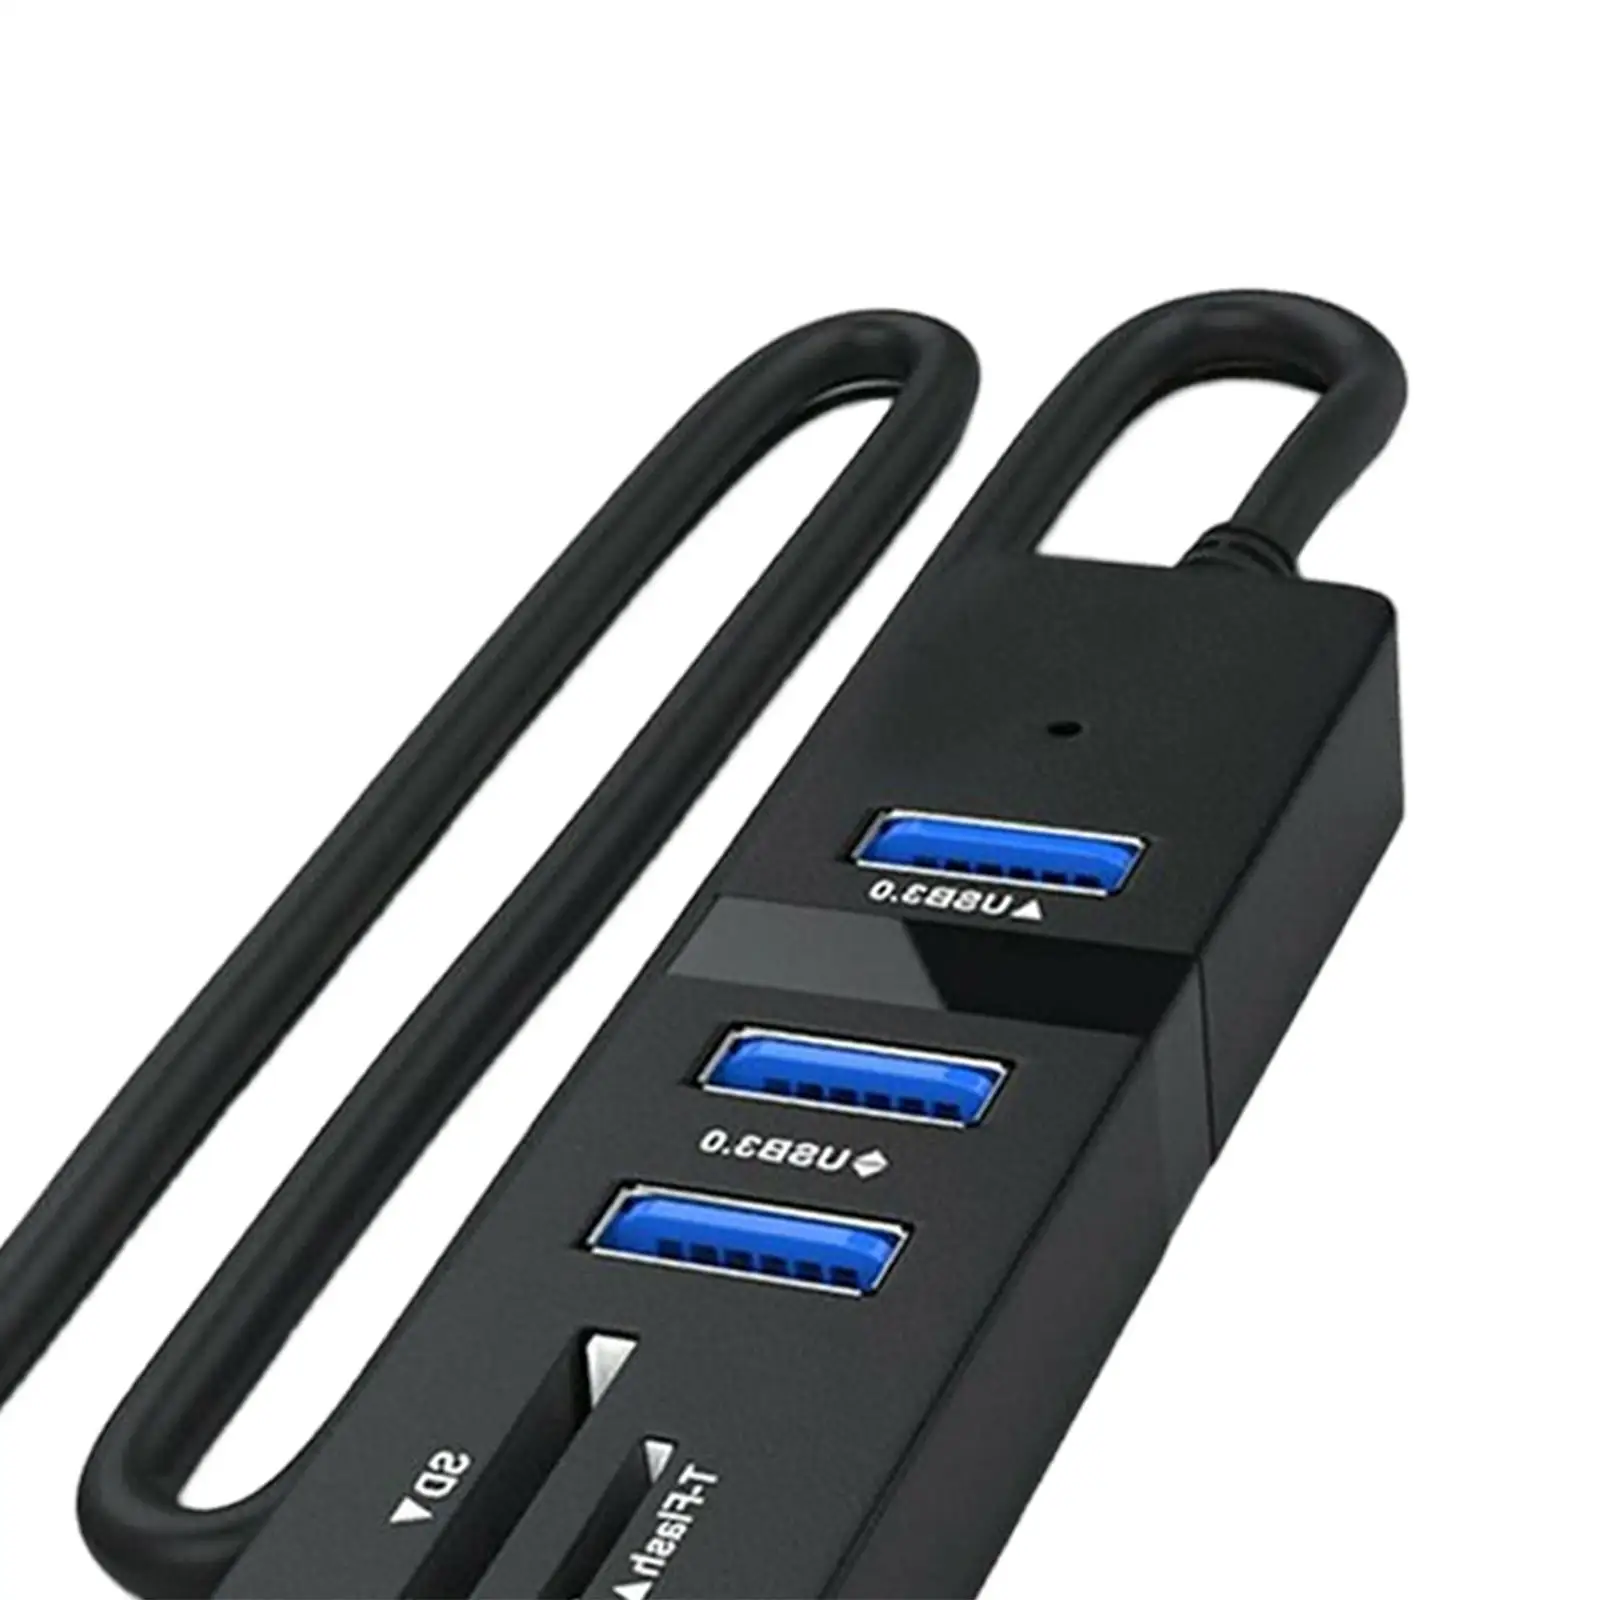 three ports USB 3.0 Hub Expansion Compact TF SD Card Slot Plug and easy to Set up Slim Adapter Data USB Hub for Laptop PC